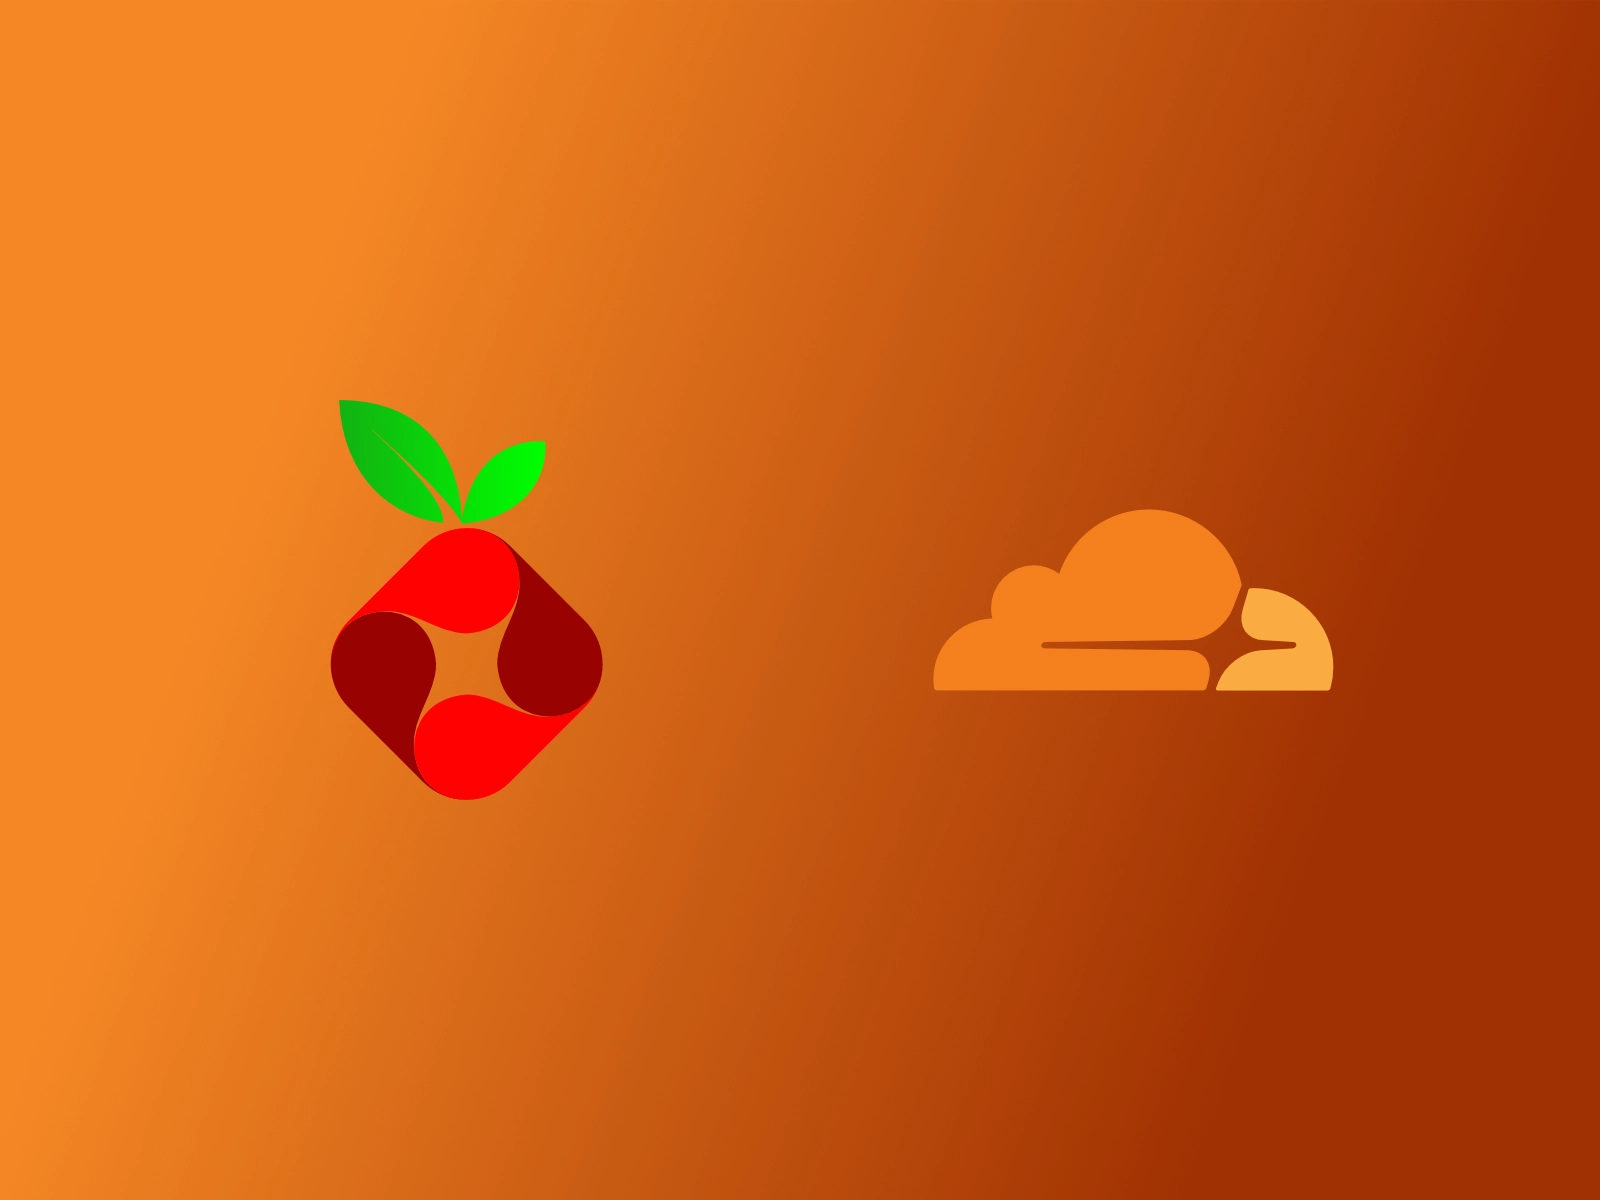 Pi-Hole and Cloudflare logos over a gradient